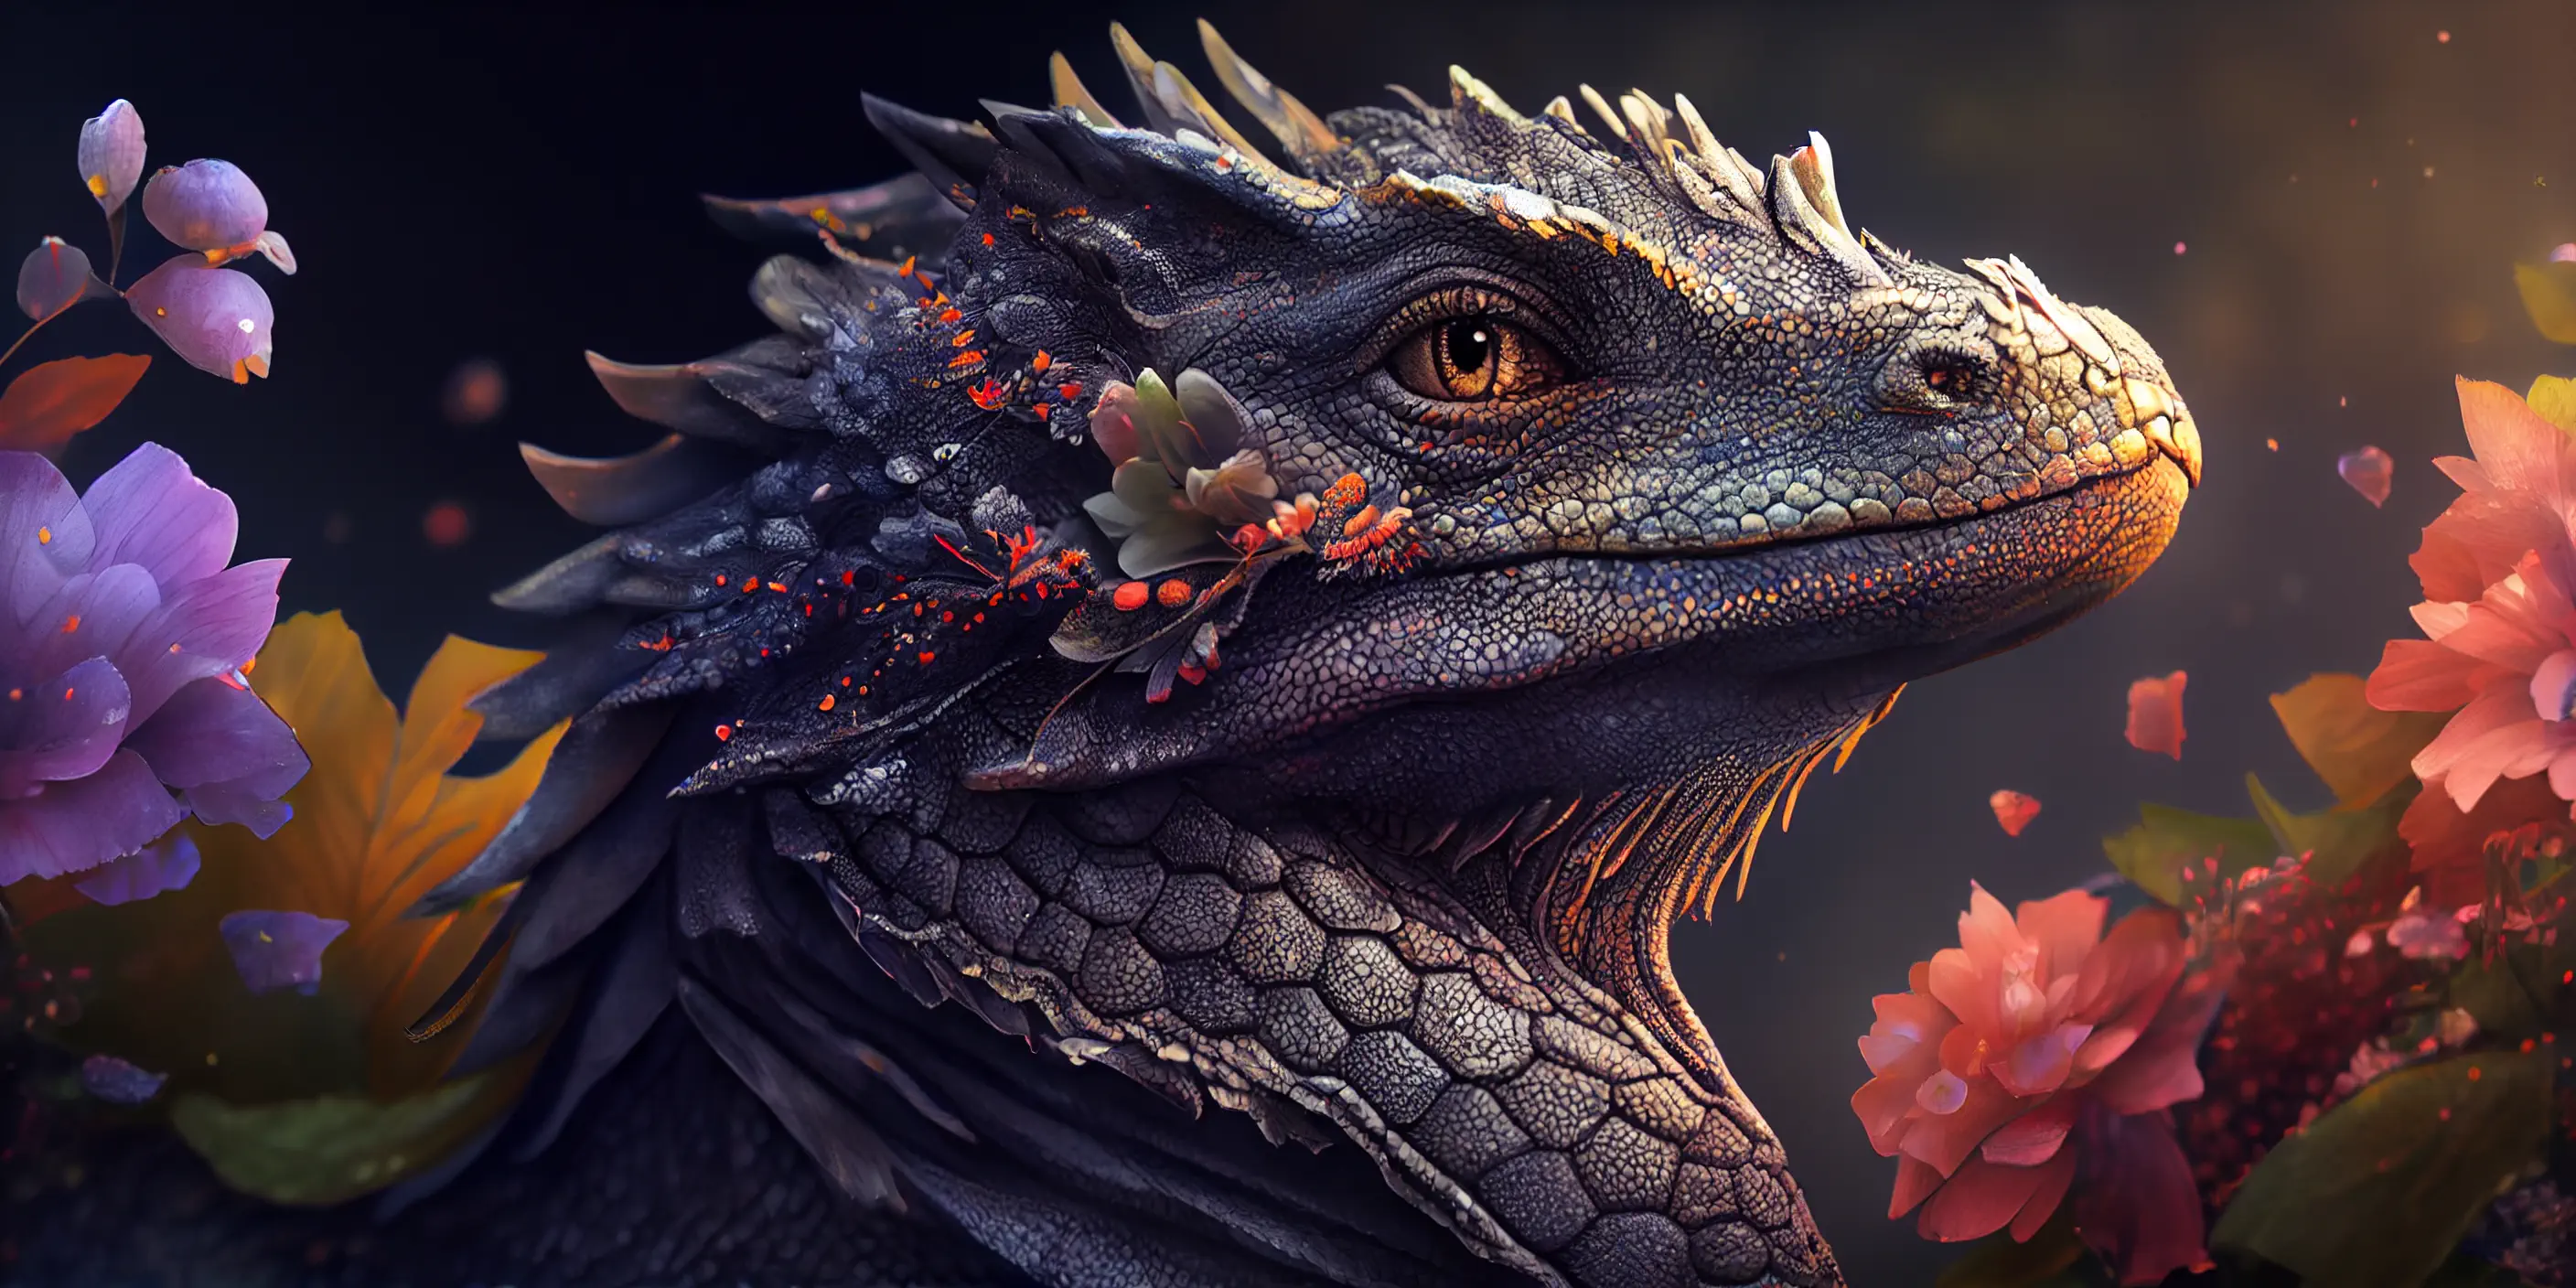 MaggyMage_portrait_of_a_young_beautiful_dragon_with_flowers_bok_a2b4affb-7abe-41f9-89e8-596b66a244c9